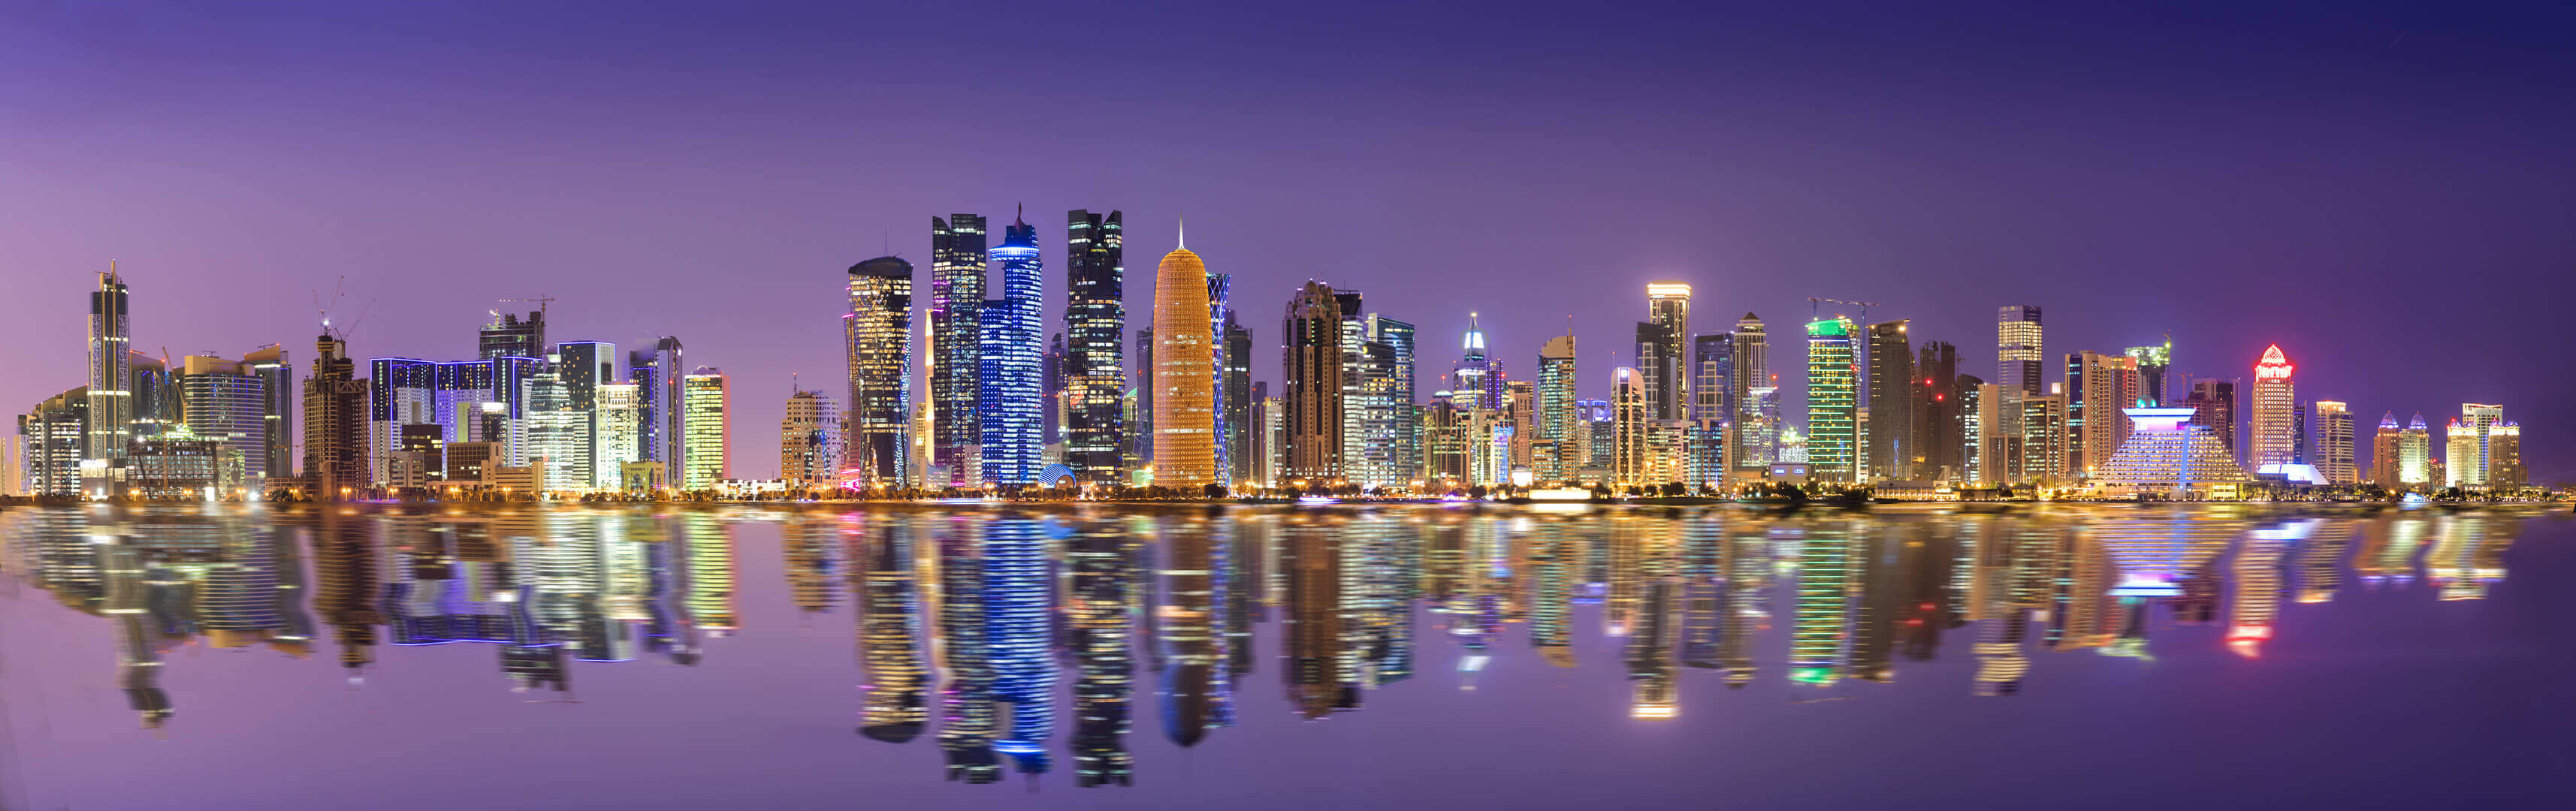 The skyline of Doha in the night